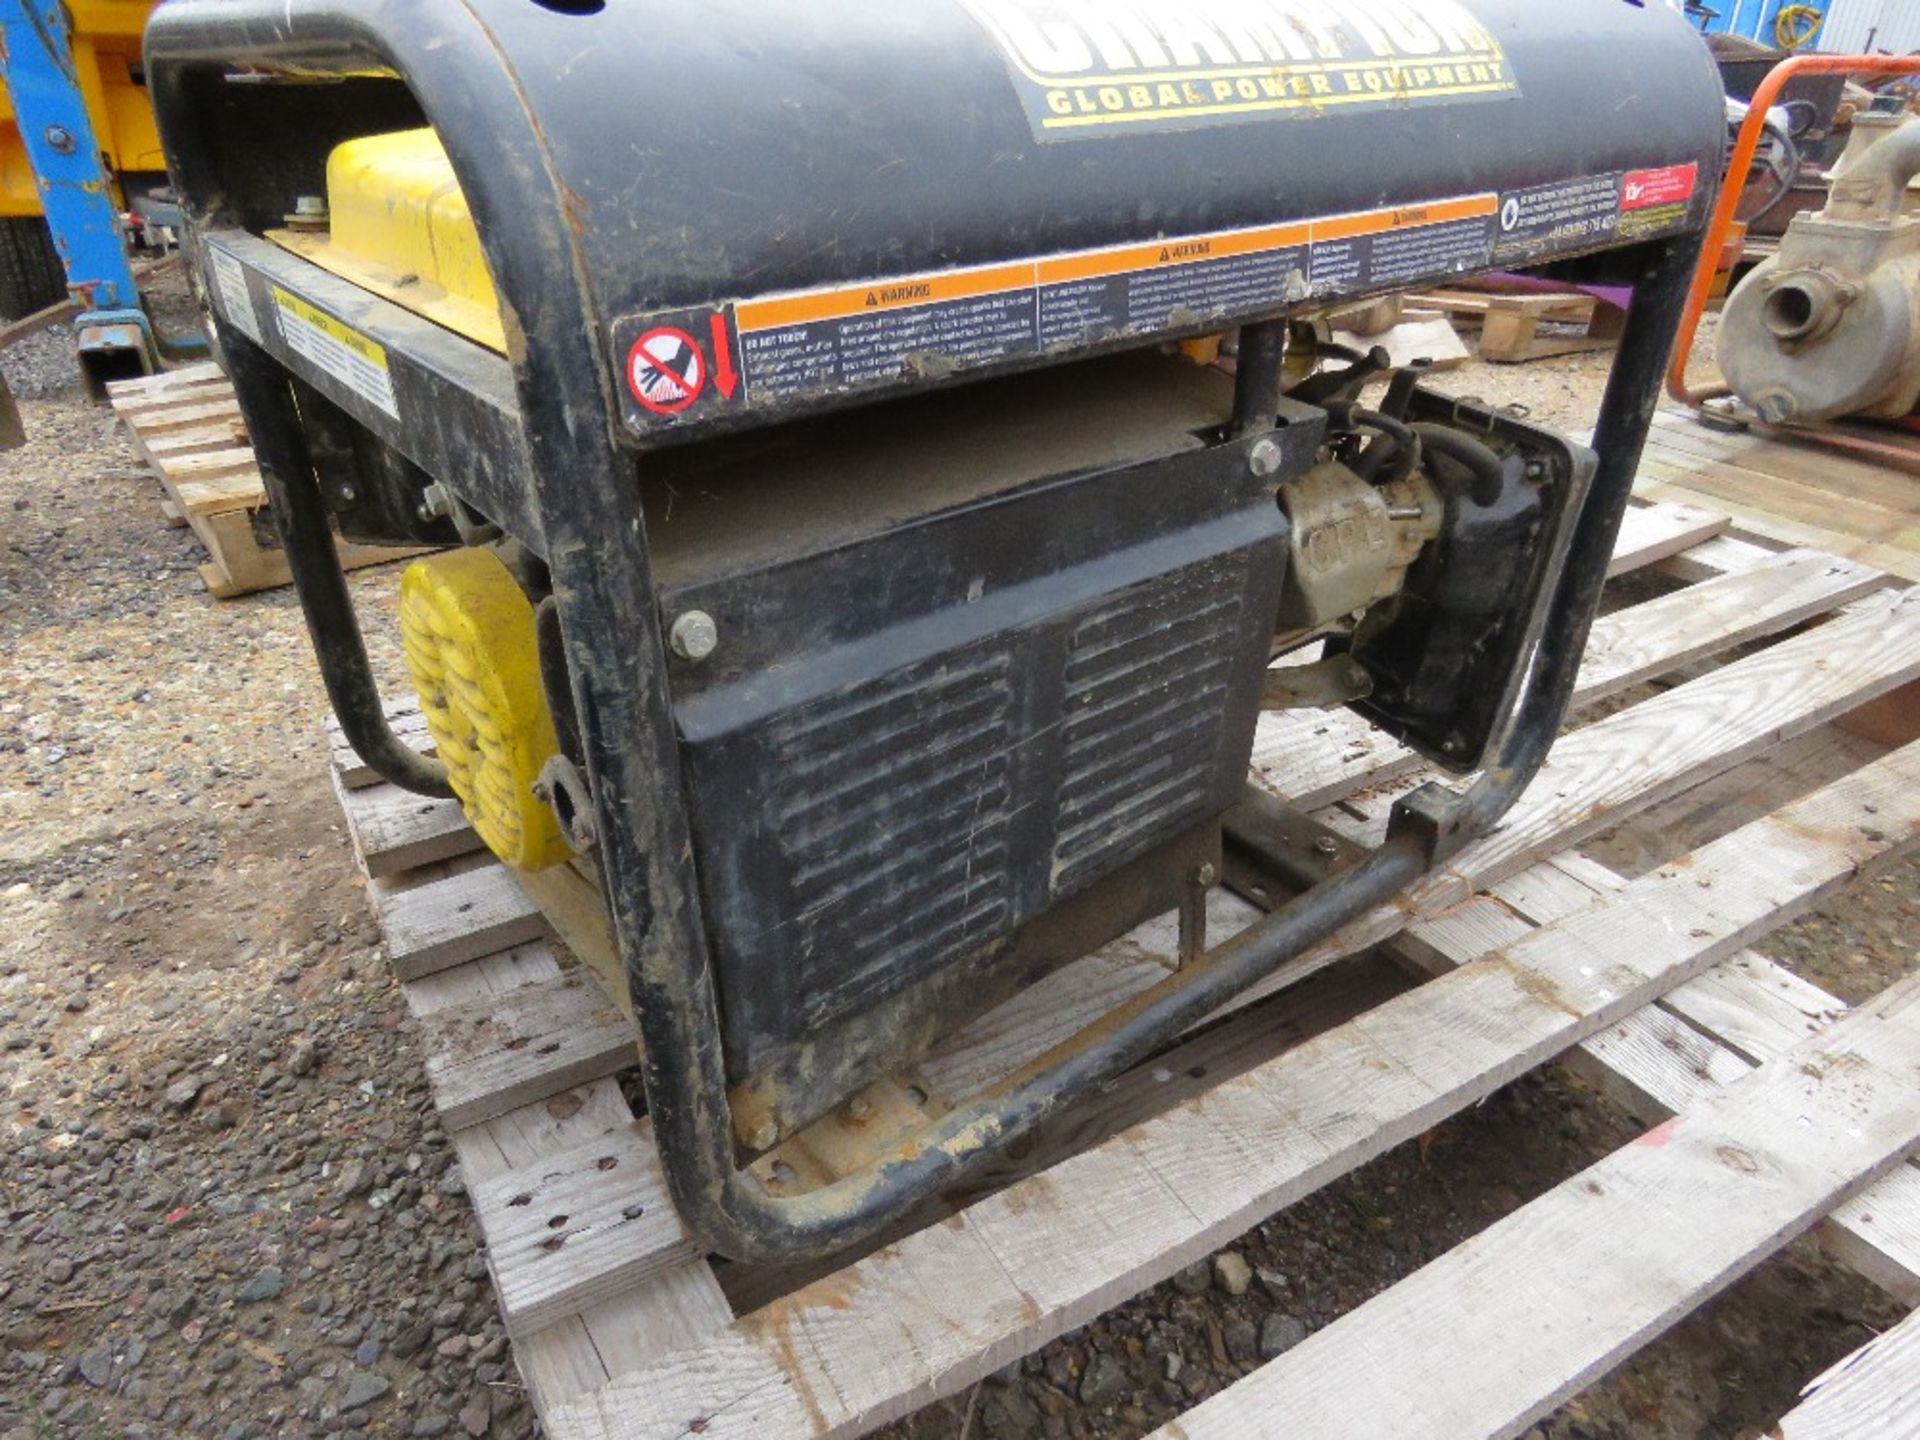 CHAMPION 2800WATT PETROL ENGINED GENERATOR. THIS LOT IS SOLD UNDER THE AUCTIONEERS MARGIN SCHEME, - Image 3 of 3